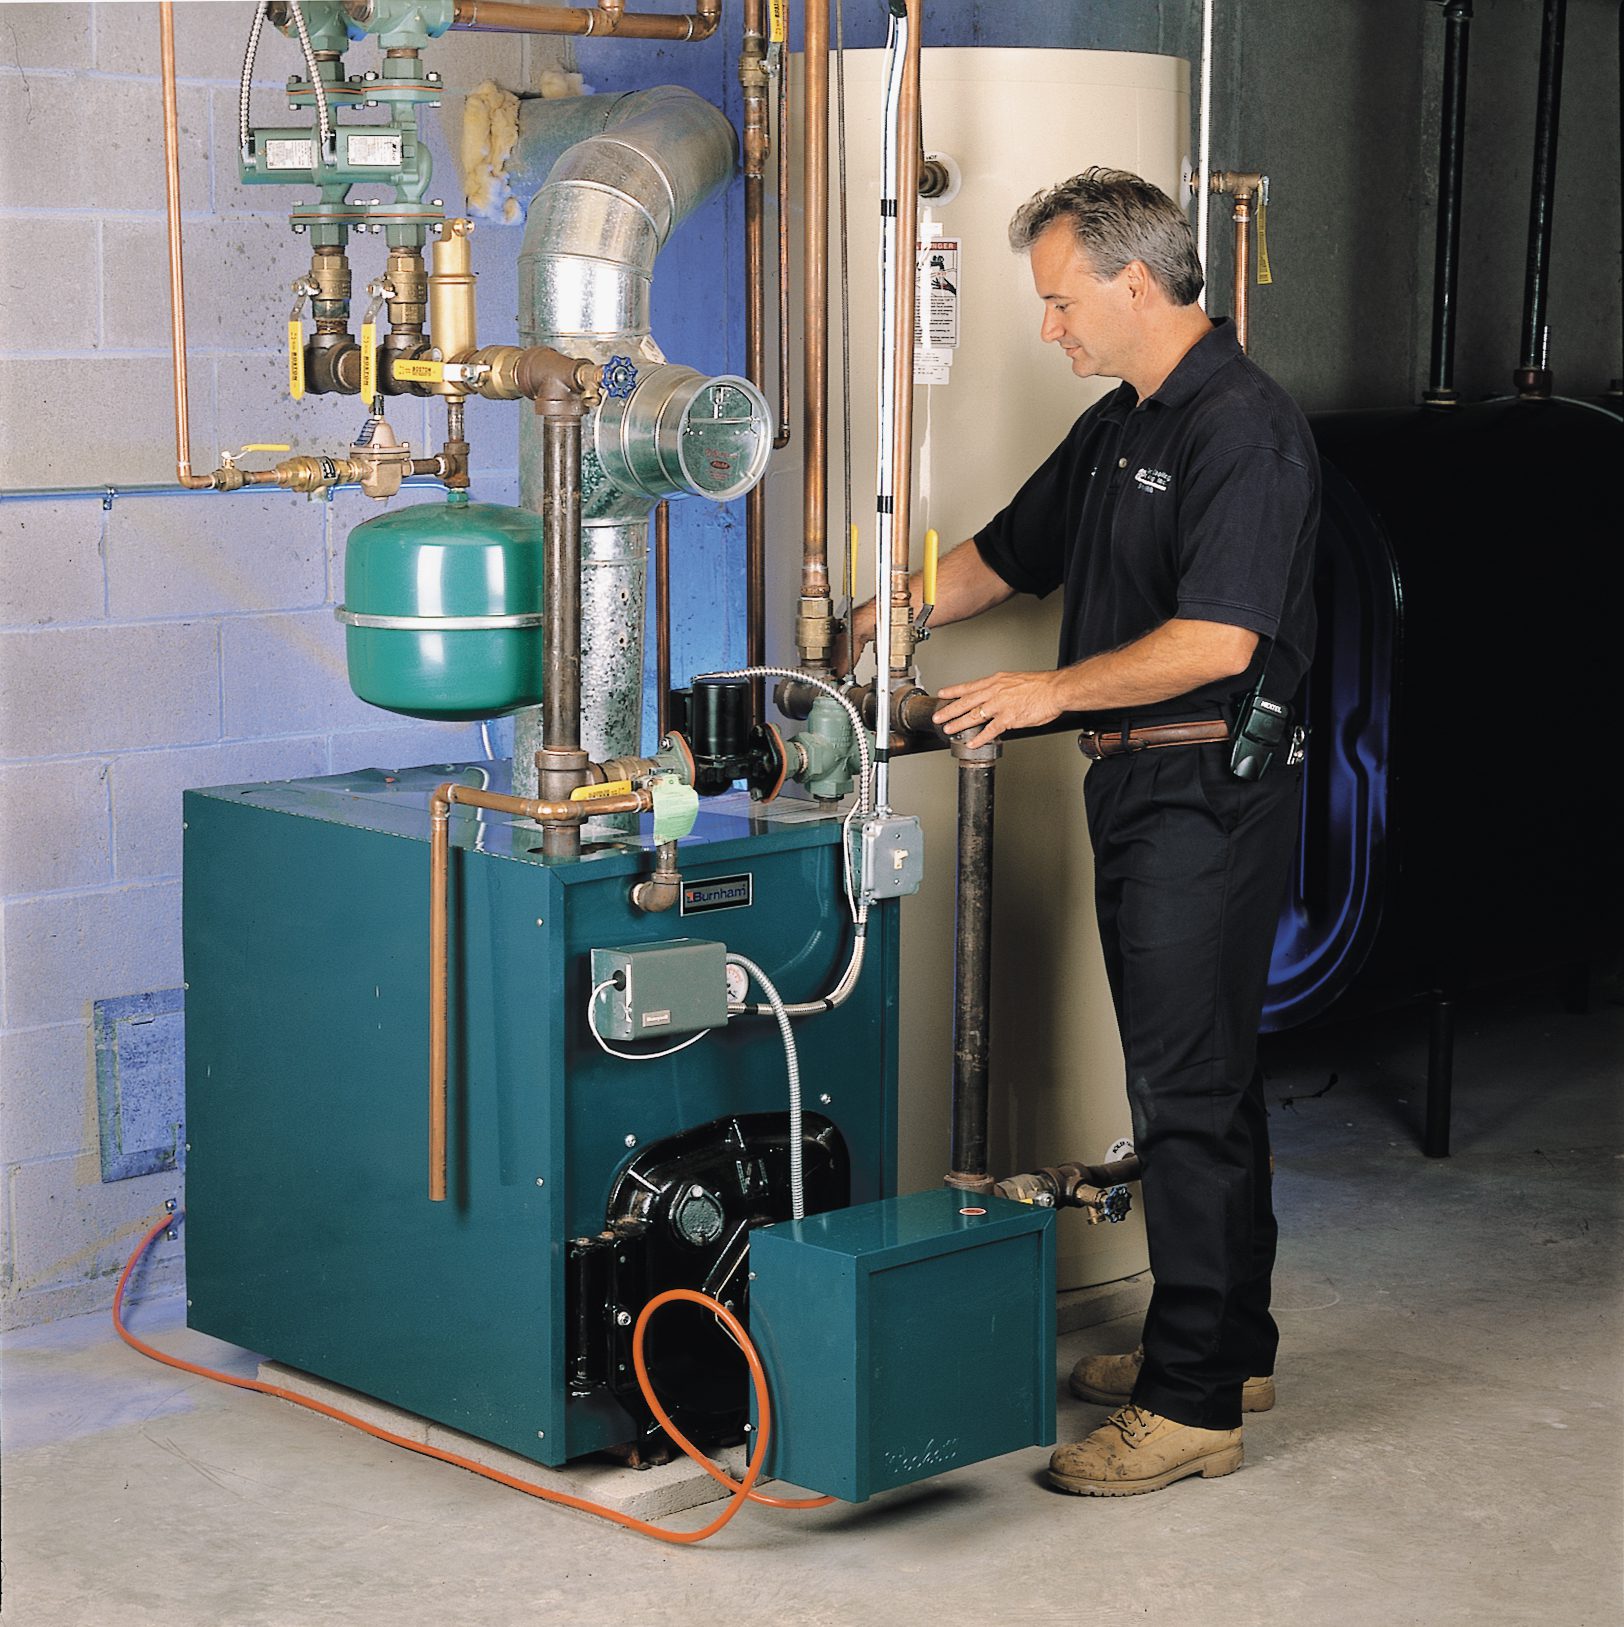 CPS Heating & Cooling can help homeowners determine when it's time to replace their furnace.